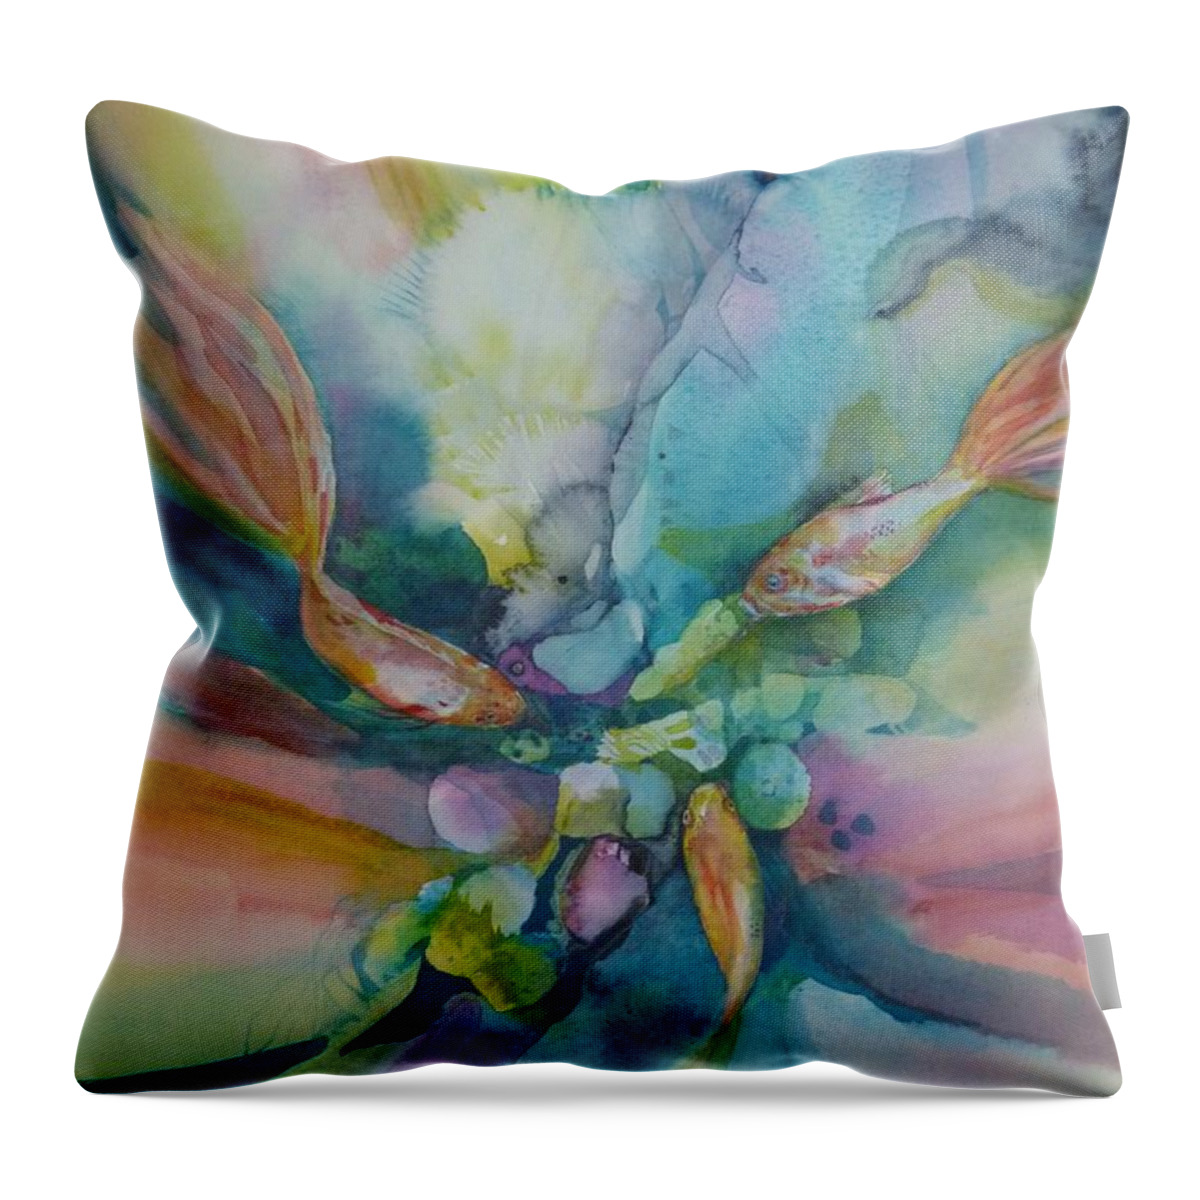 Fish Throw Pillow featuring the painting Fish Tales by Donna Acheson-Juillet